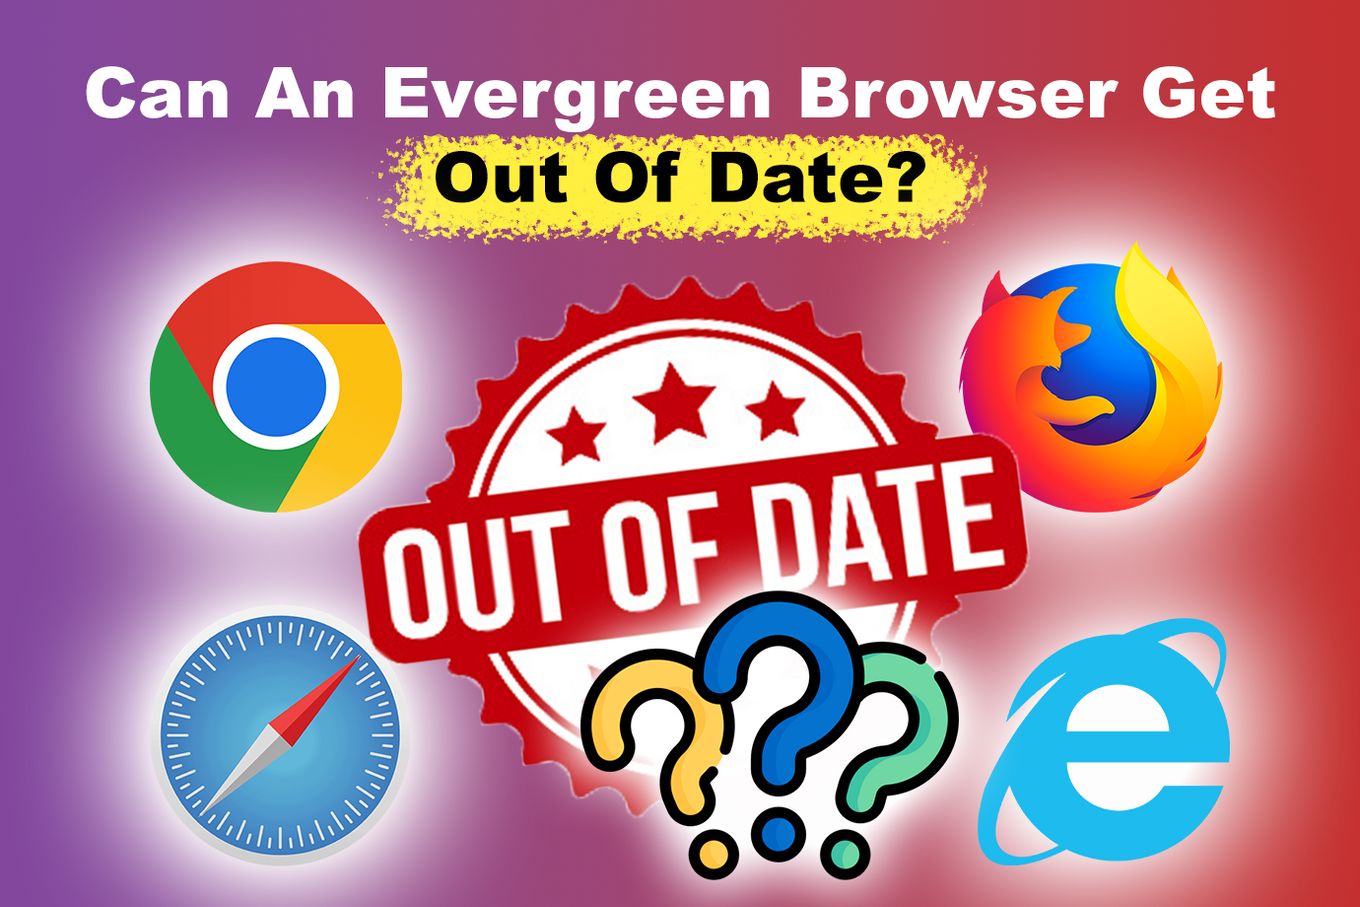 Can Evergreen Browsers Get Out Of Date?